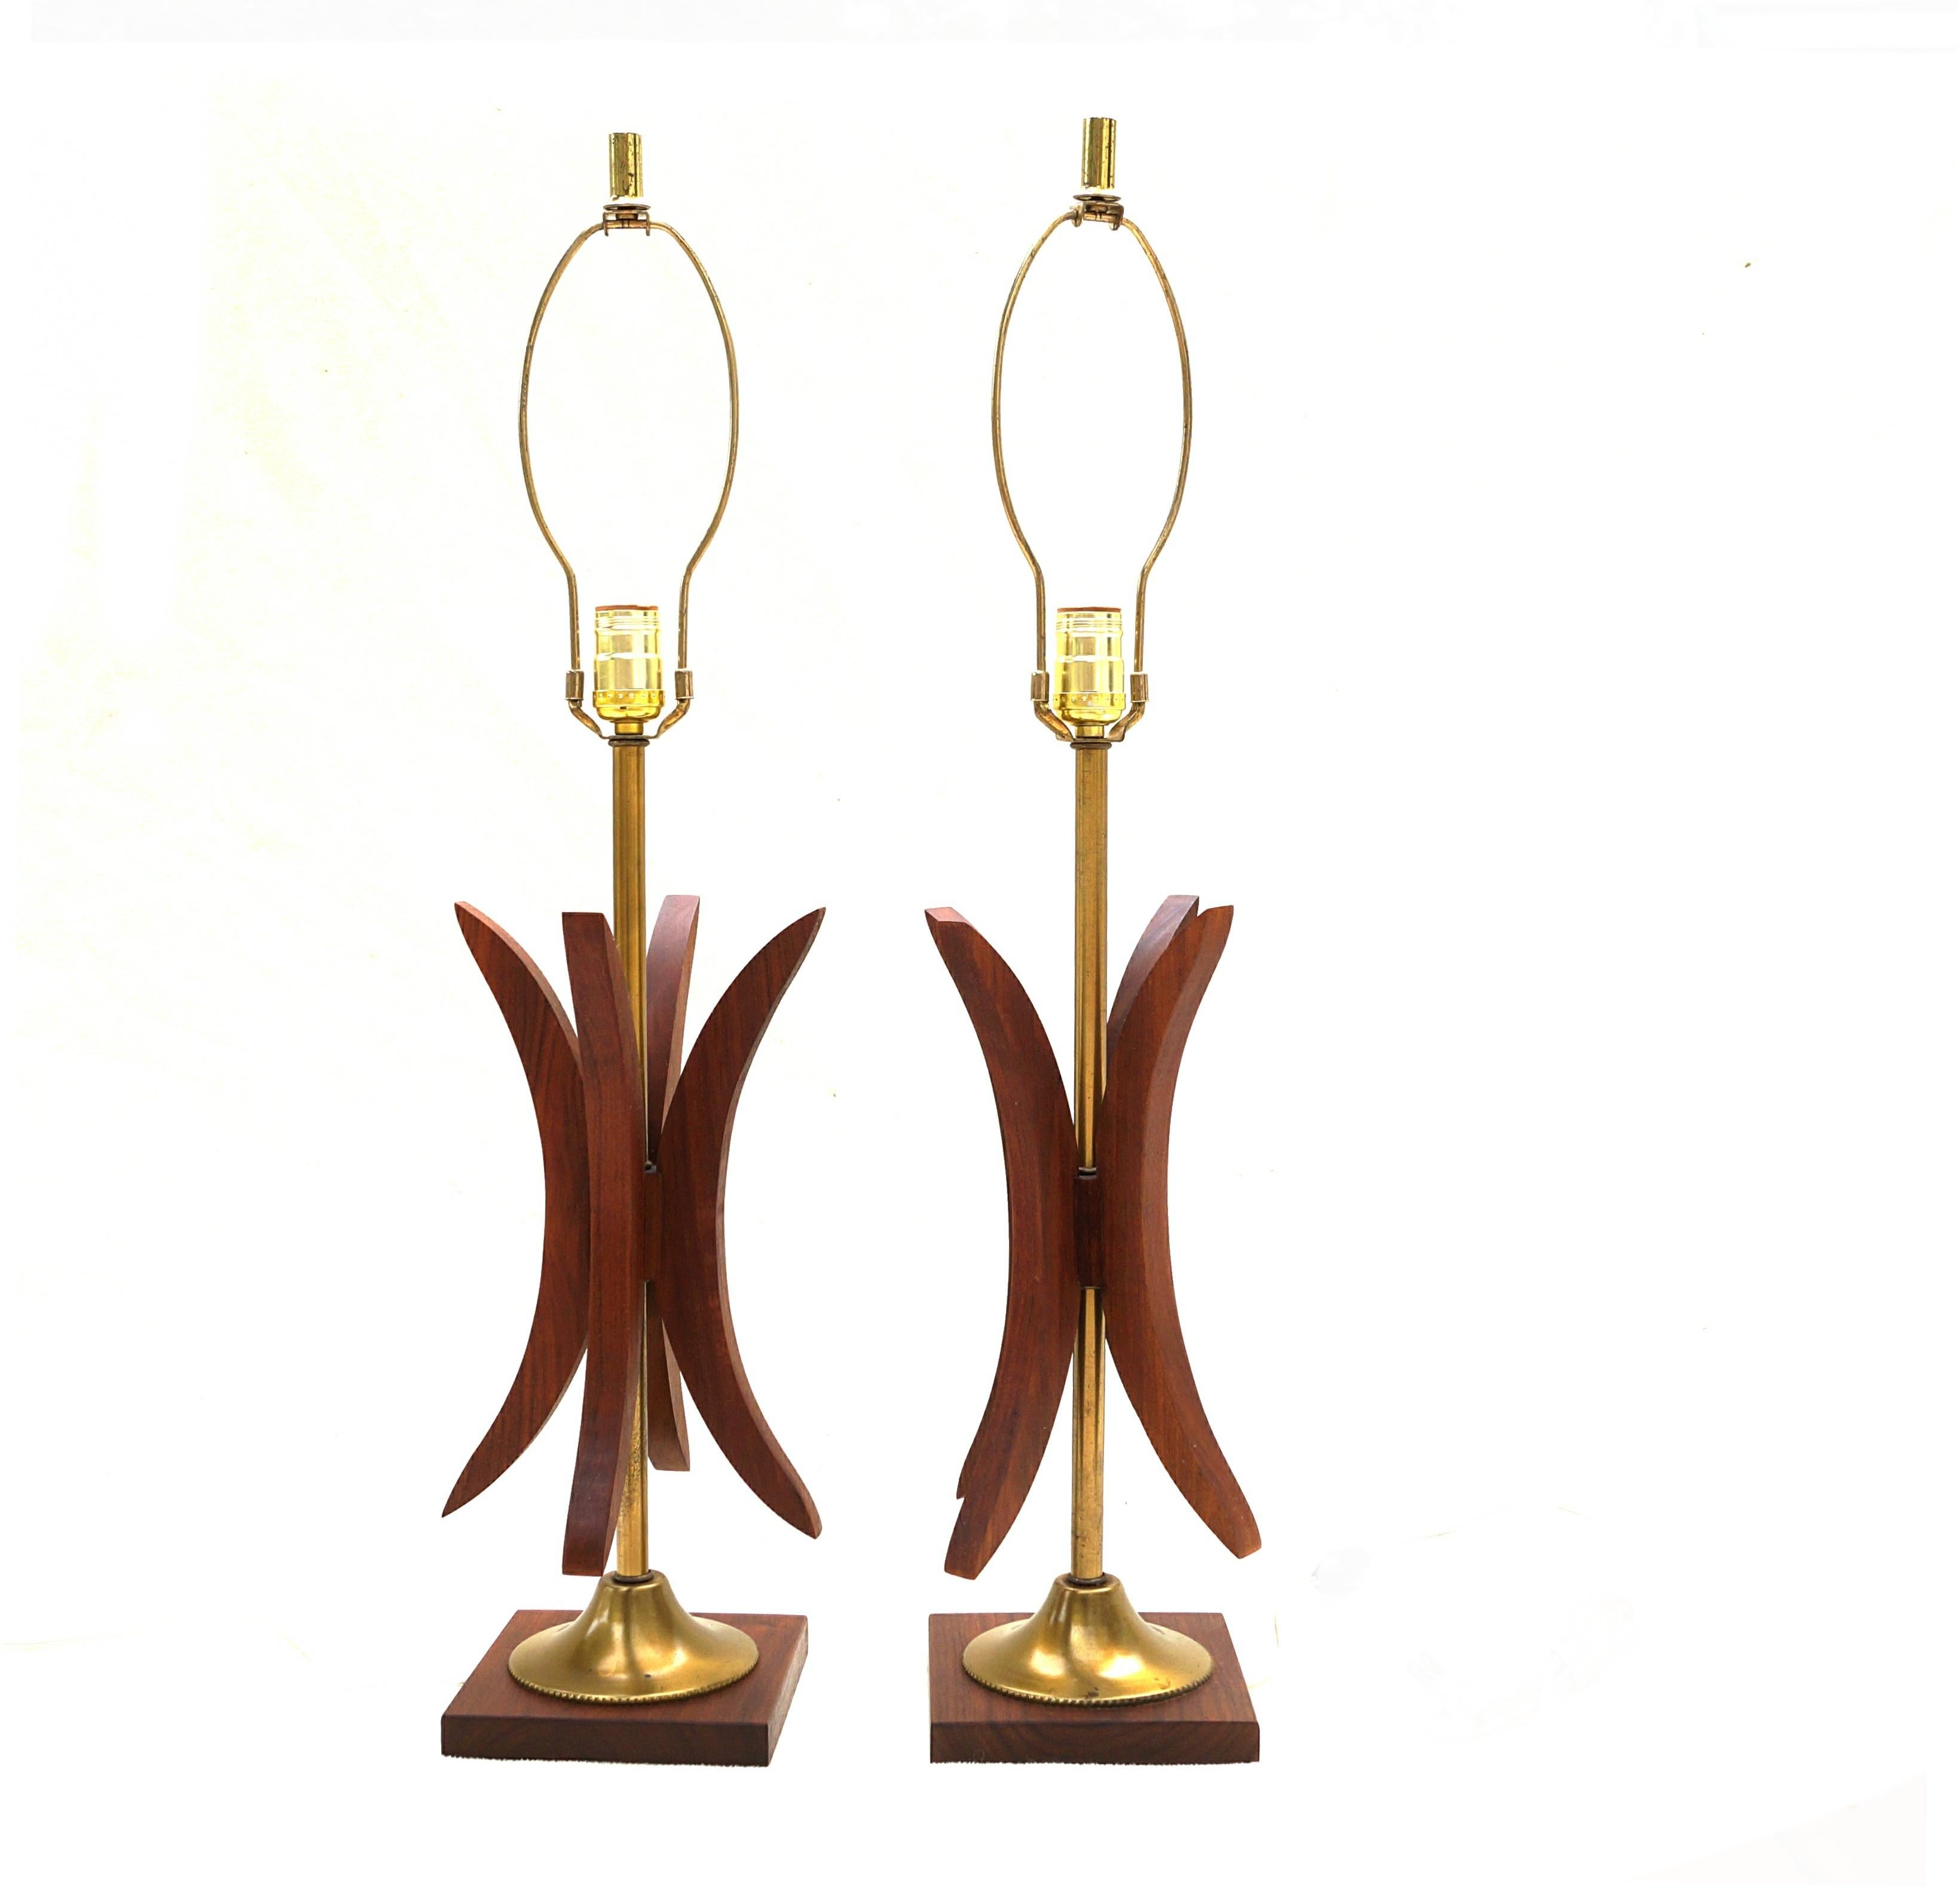 1960's Adrian Pearsall attributed sculptural wood and brass 3 way table lamps 
Height to light socket 21.25''